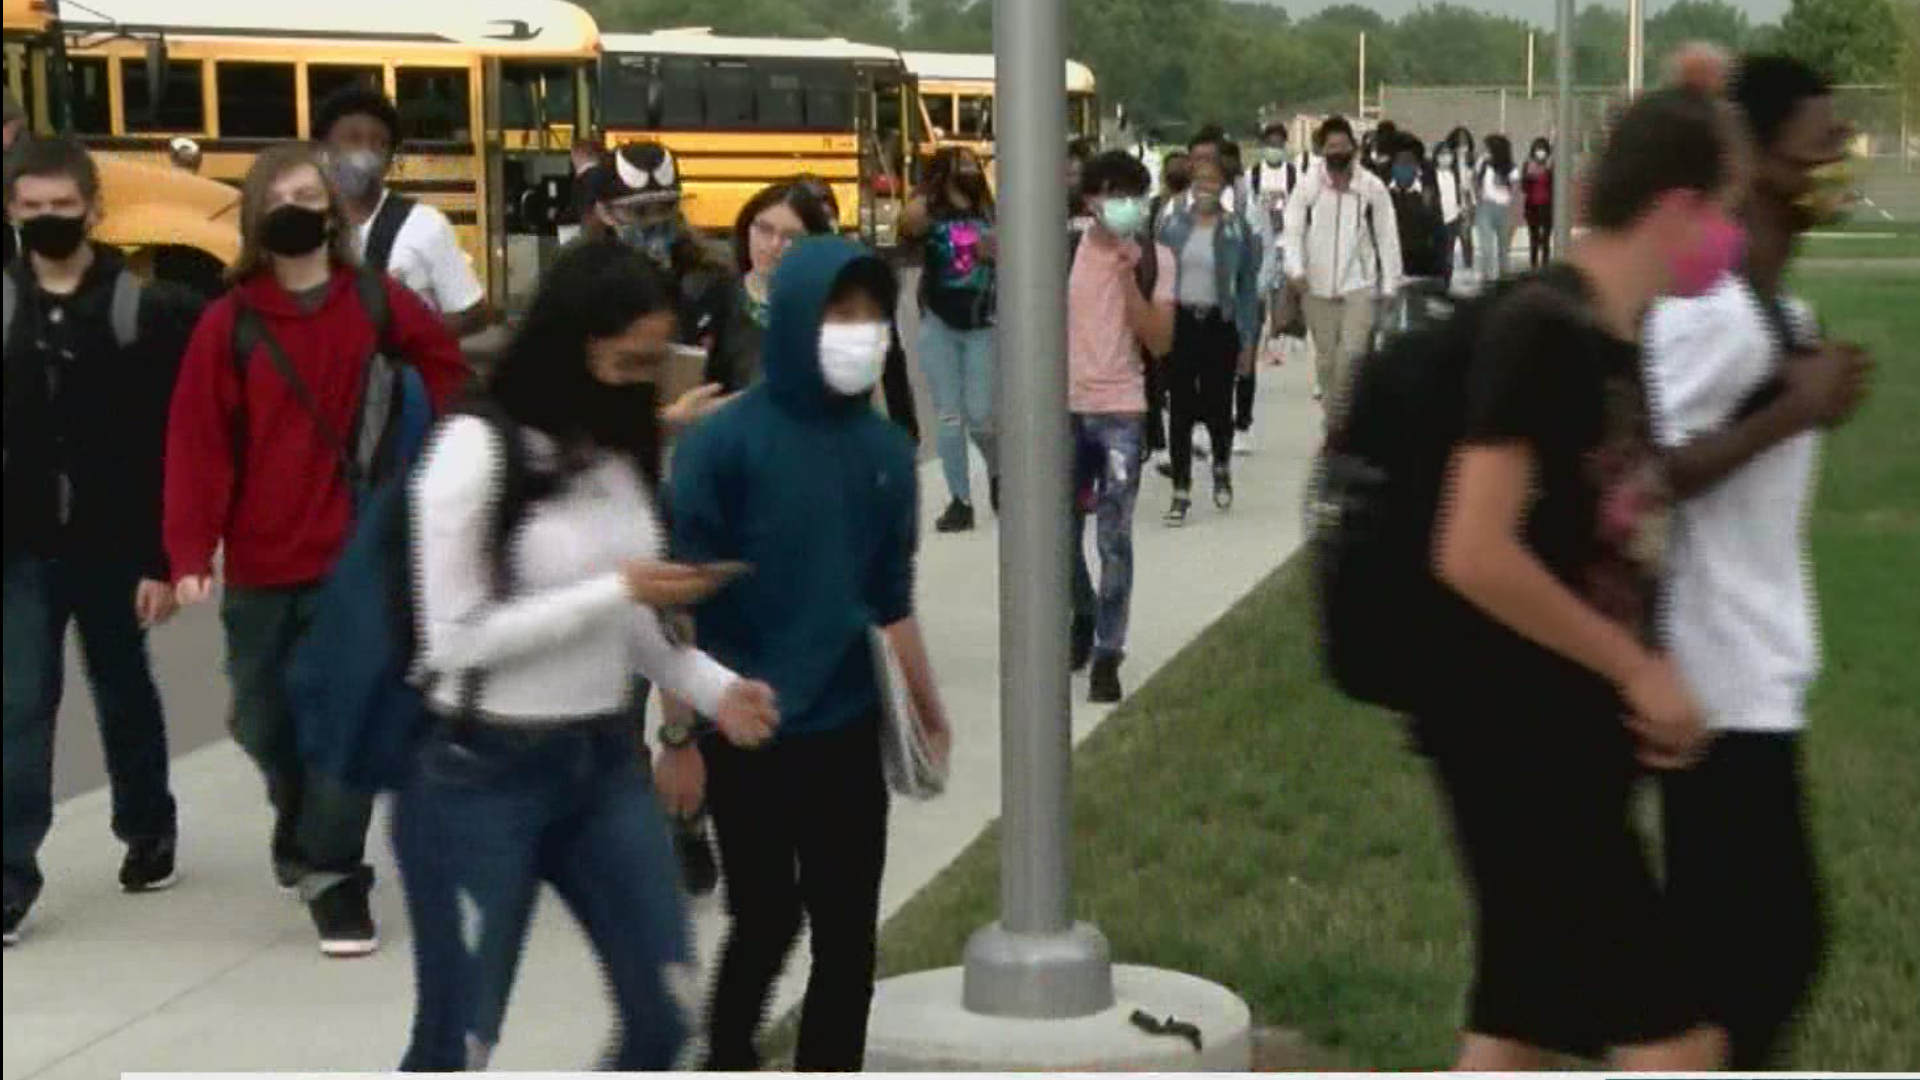 The CDC may be recommending masks as school starts back up, but a May 18 executive order by Gov. Abbott still says they can't be required.